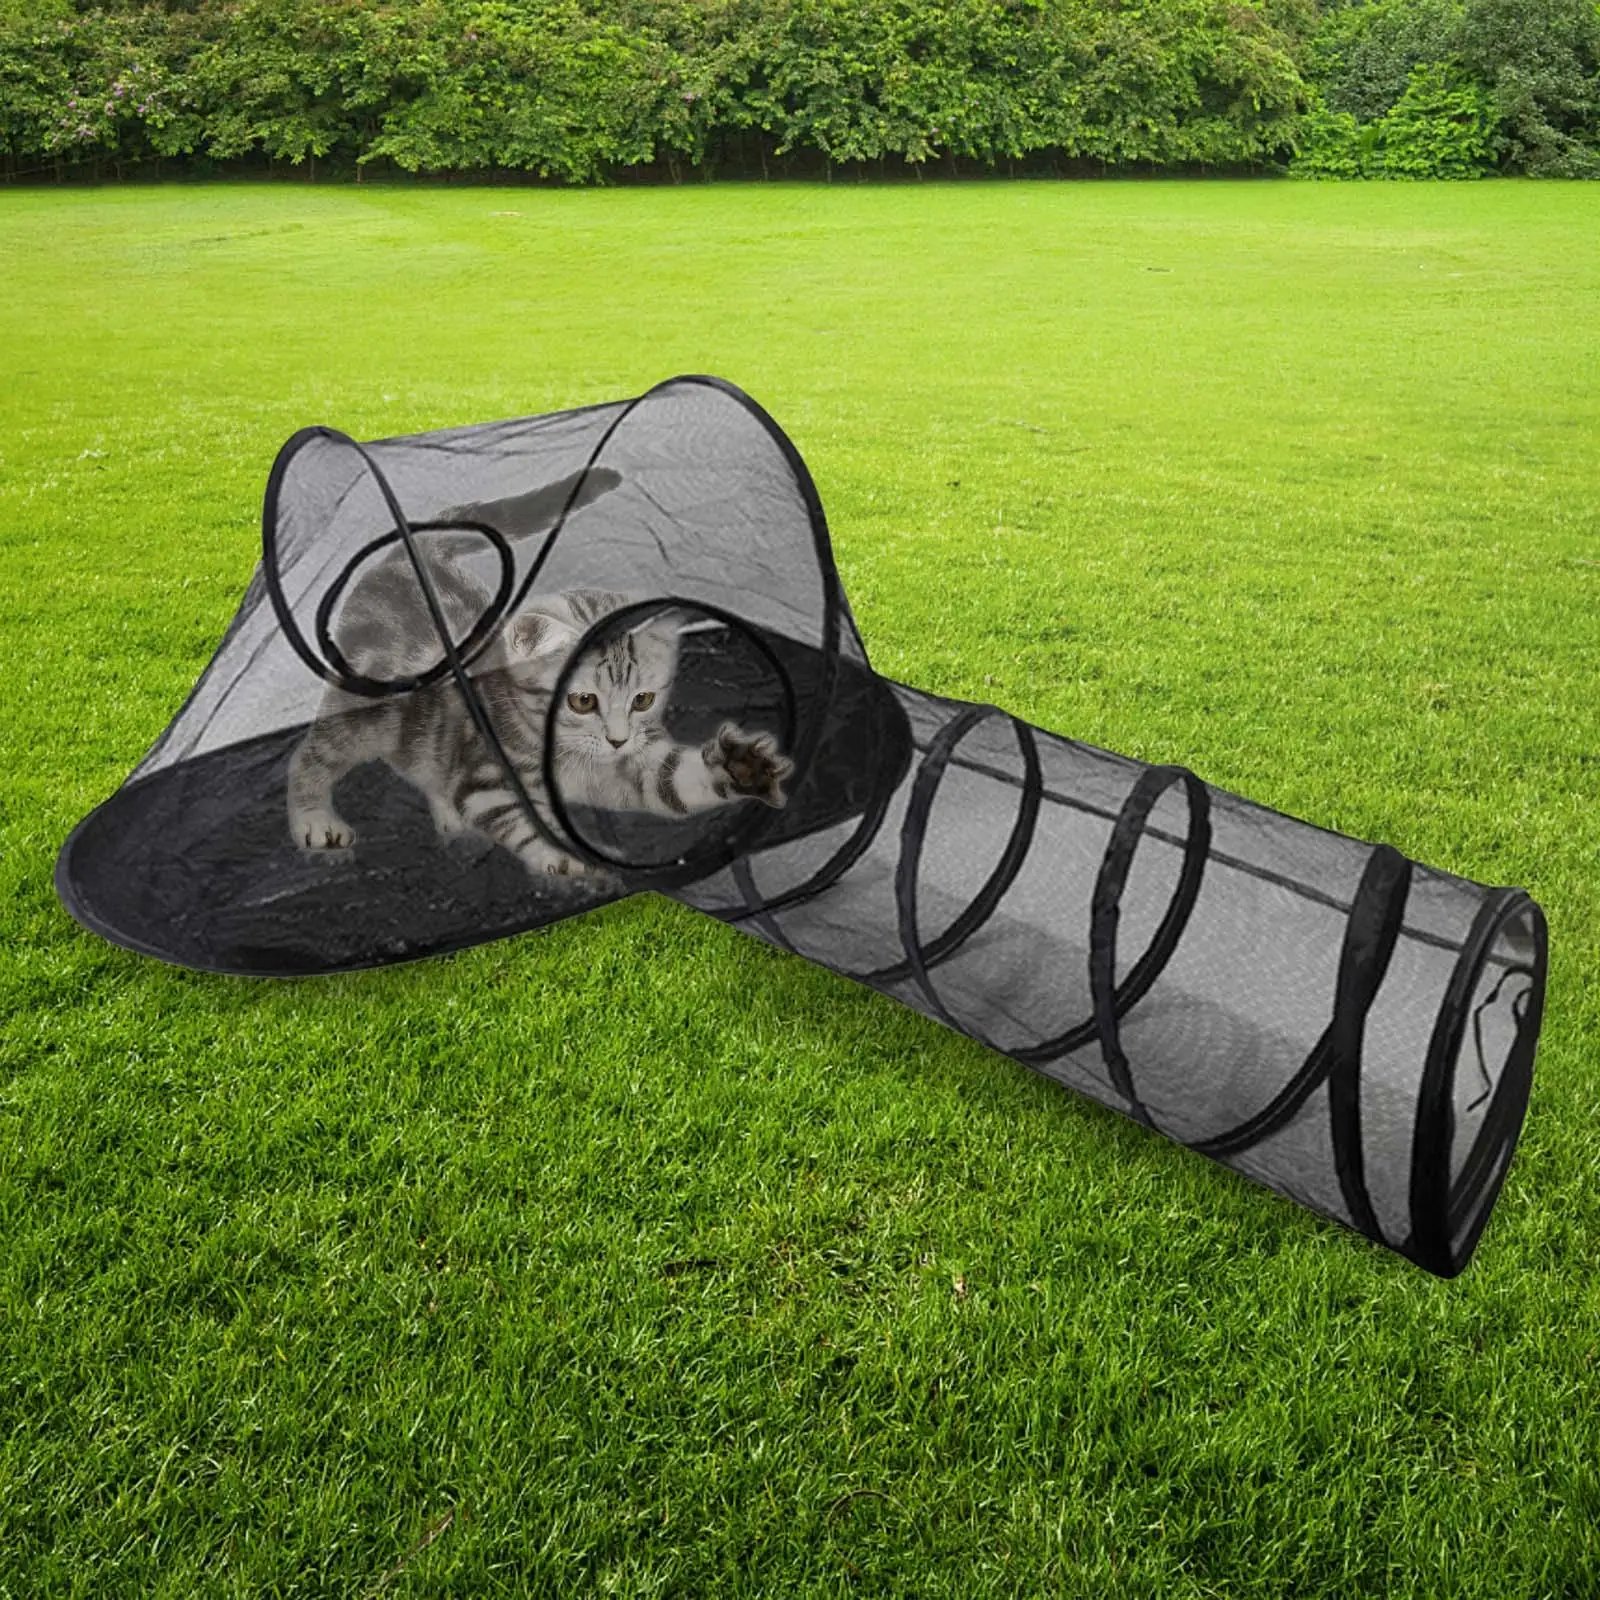 Cat Tent and Tunnel Outdoor with Carry Bag Breathable Mesh Puppy Playhouse for